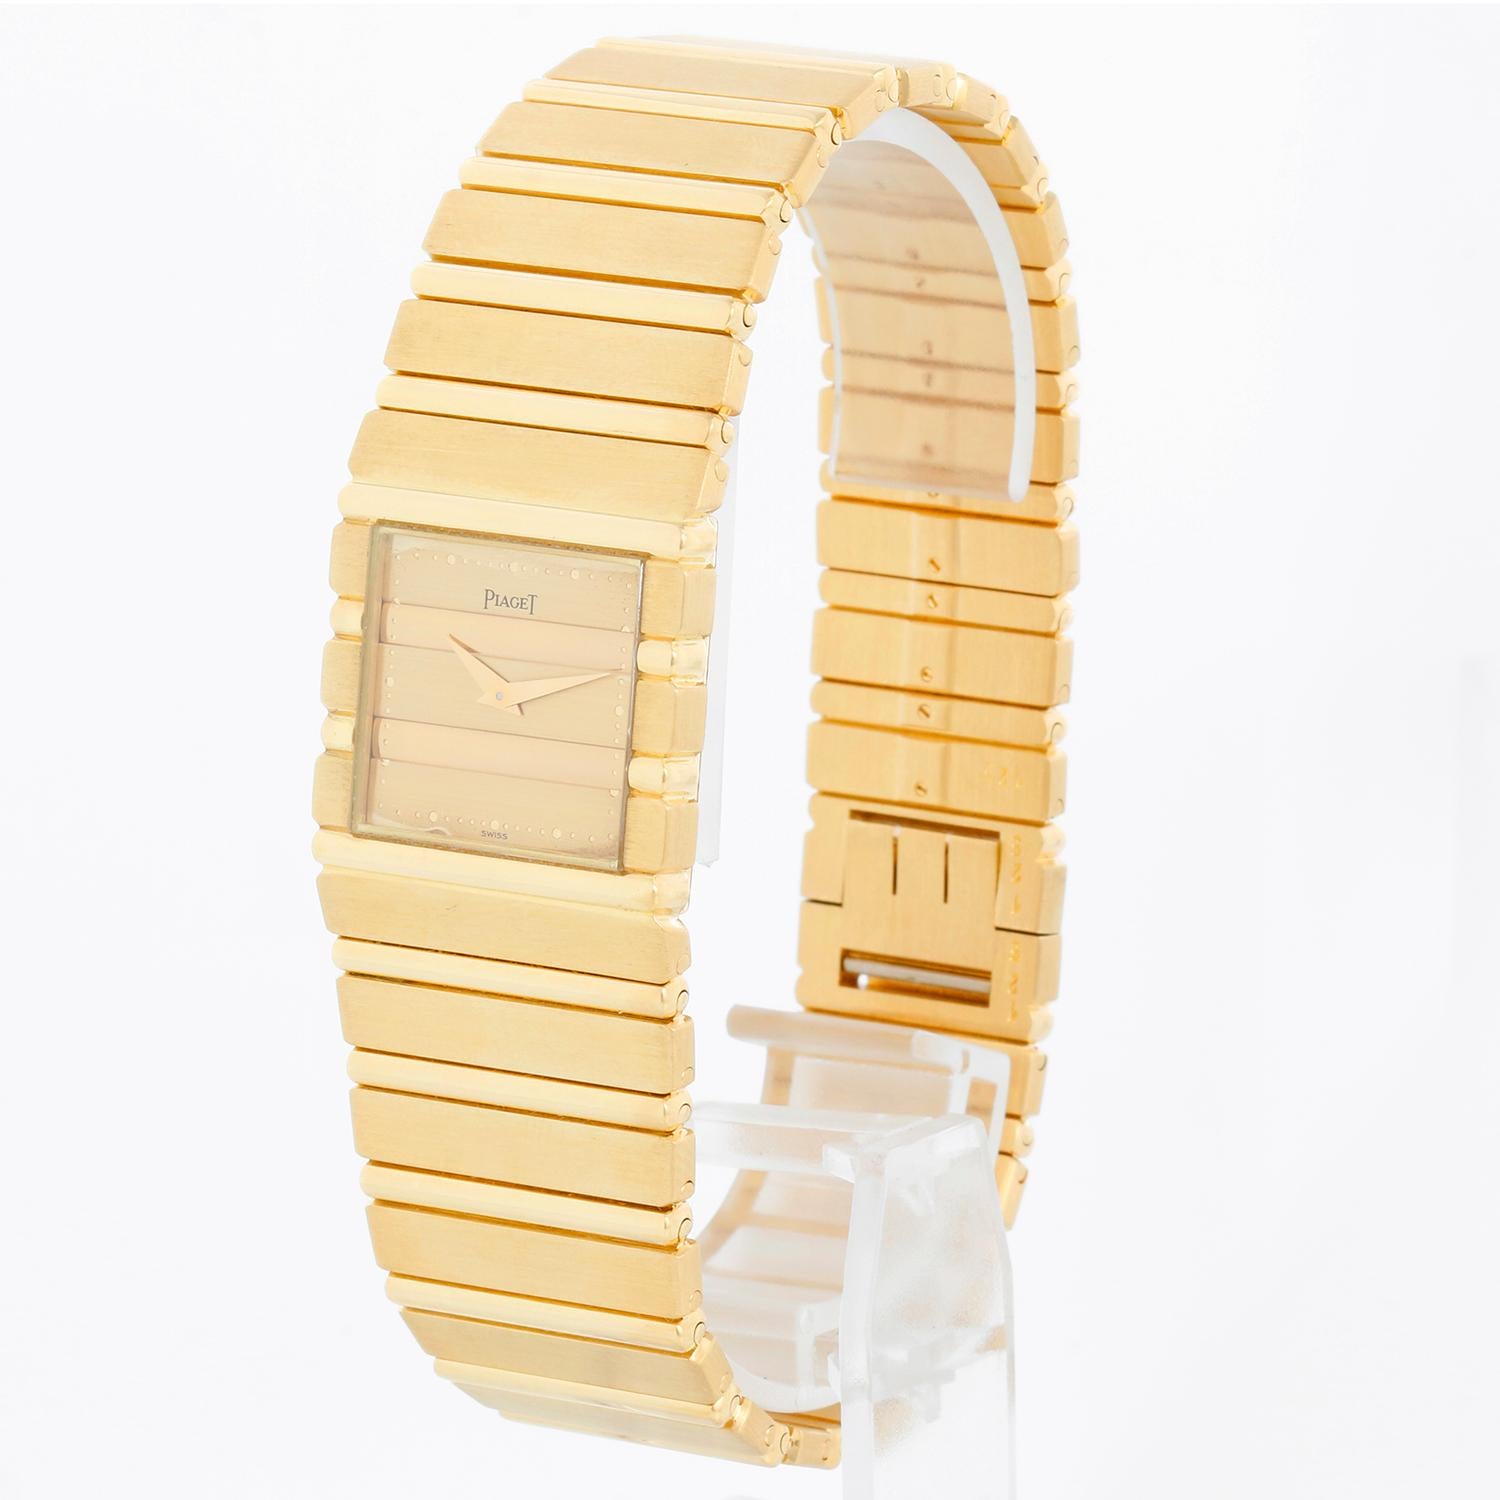 Piaget Polo 18K Yellow Gold Men's Watch 7131 C701 - Quartz. 18K Yellow Gold ( 25 x 25 mm ). Gold dial with round hour markers. 18K Yellow Gold bracelet. Pre-owned with Piaget box, service papers, and original purchase receipt.